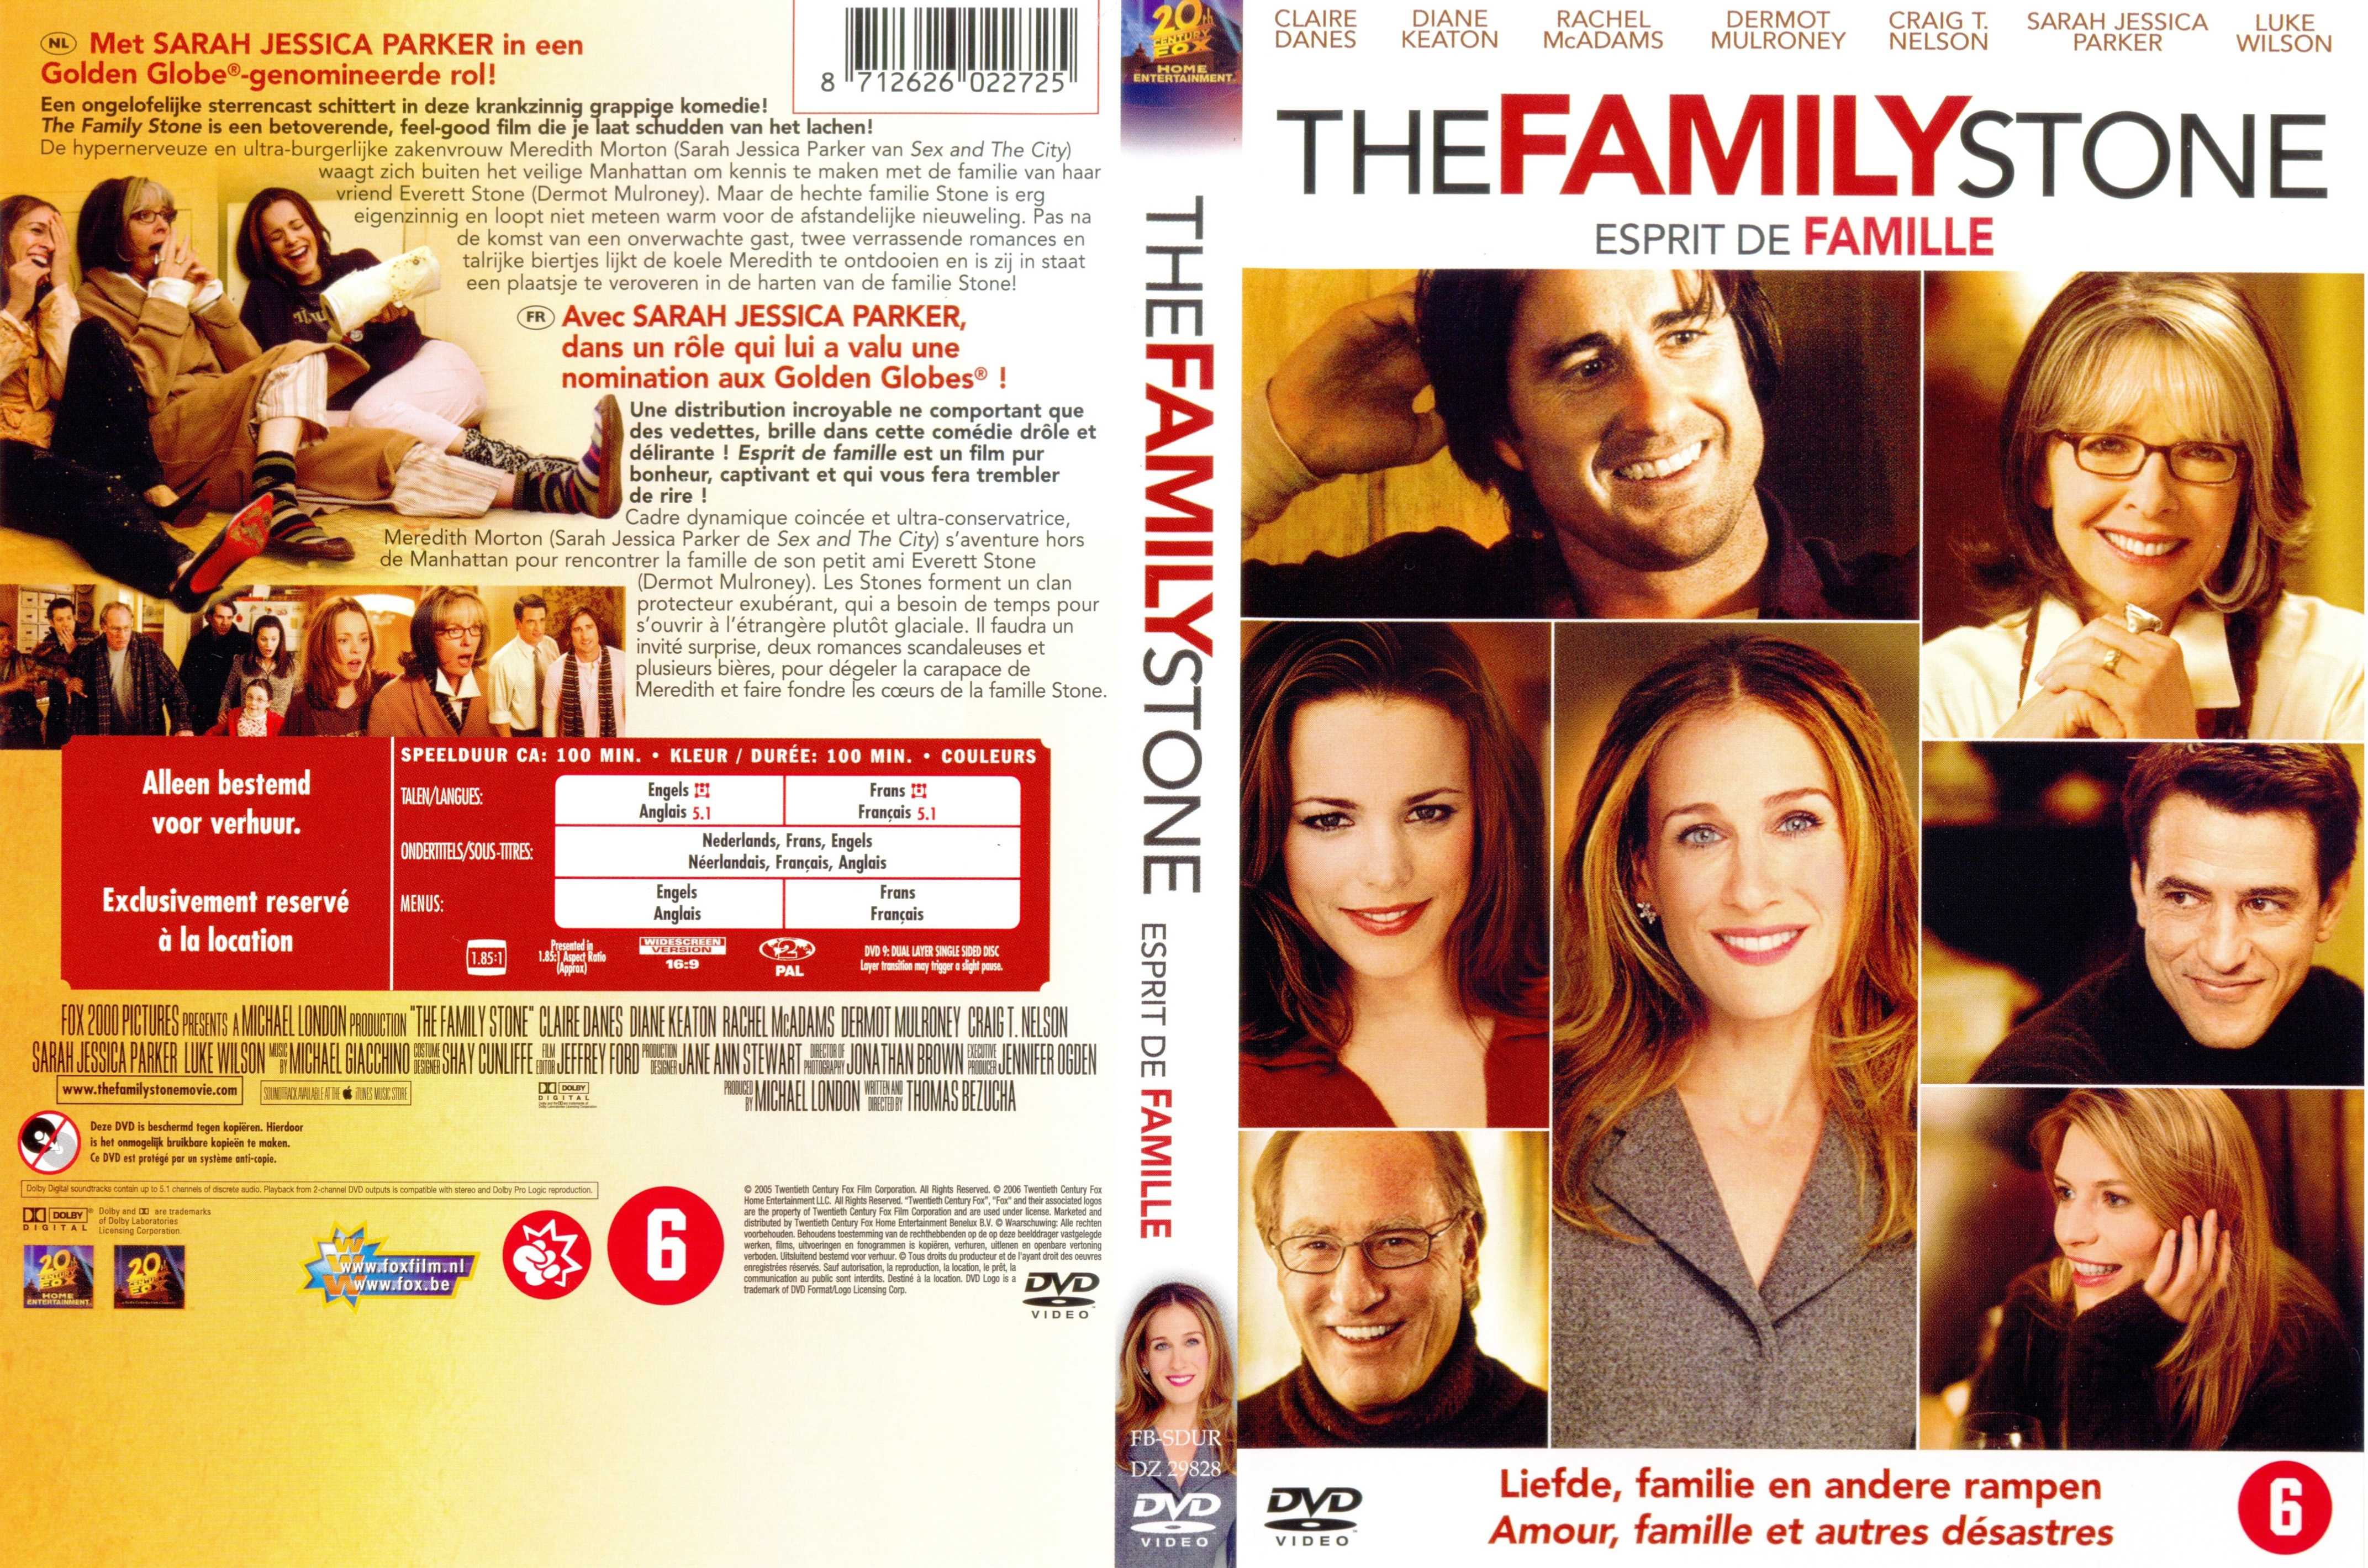 Jaquette DVD The familly stone